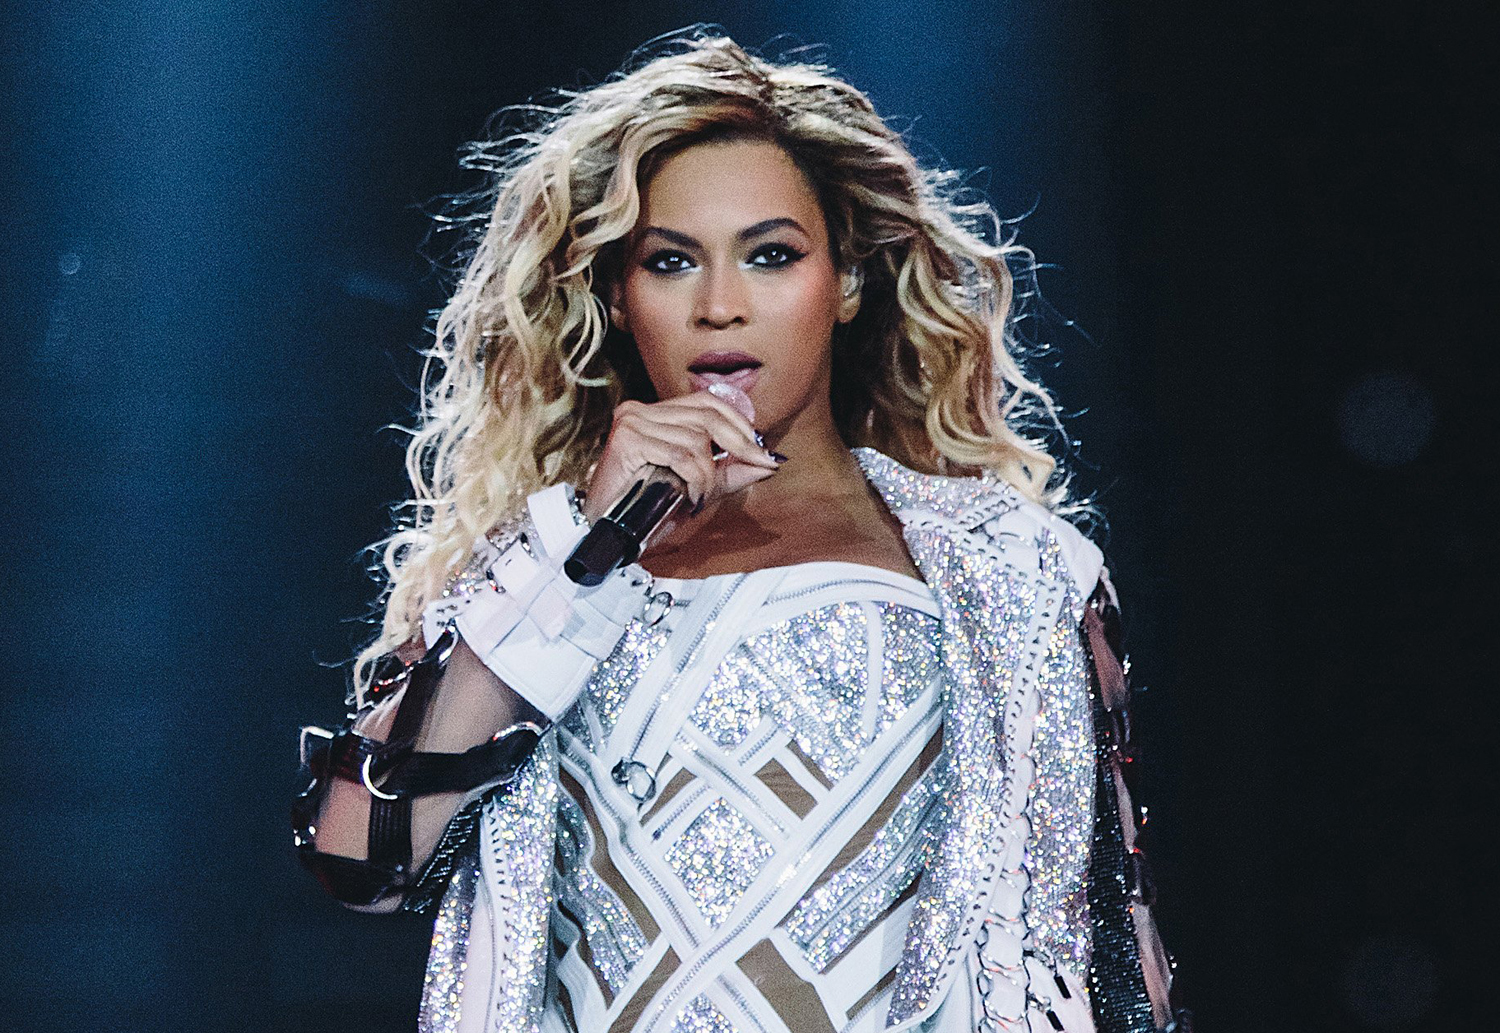 Beyoncé's 'Crazy In Love' re-recorded for 'Fifty Shades of Grey' soundtrack  • News • DIY Magazine